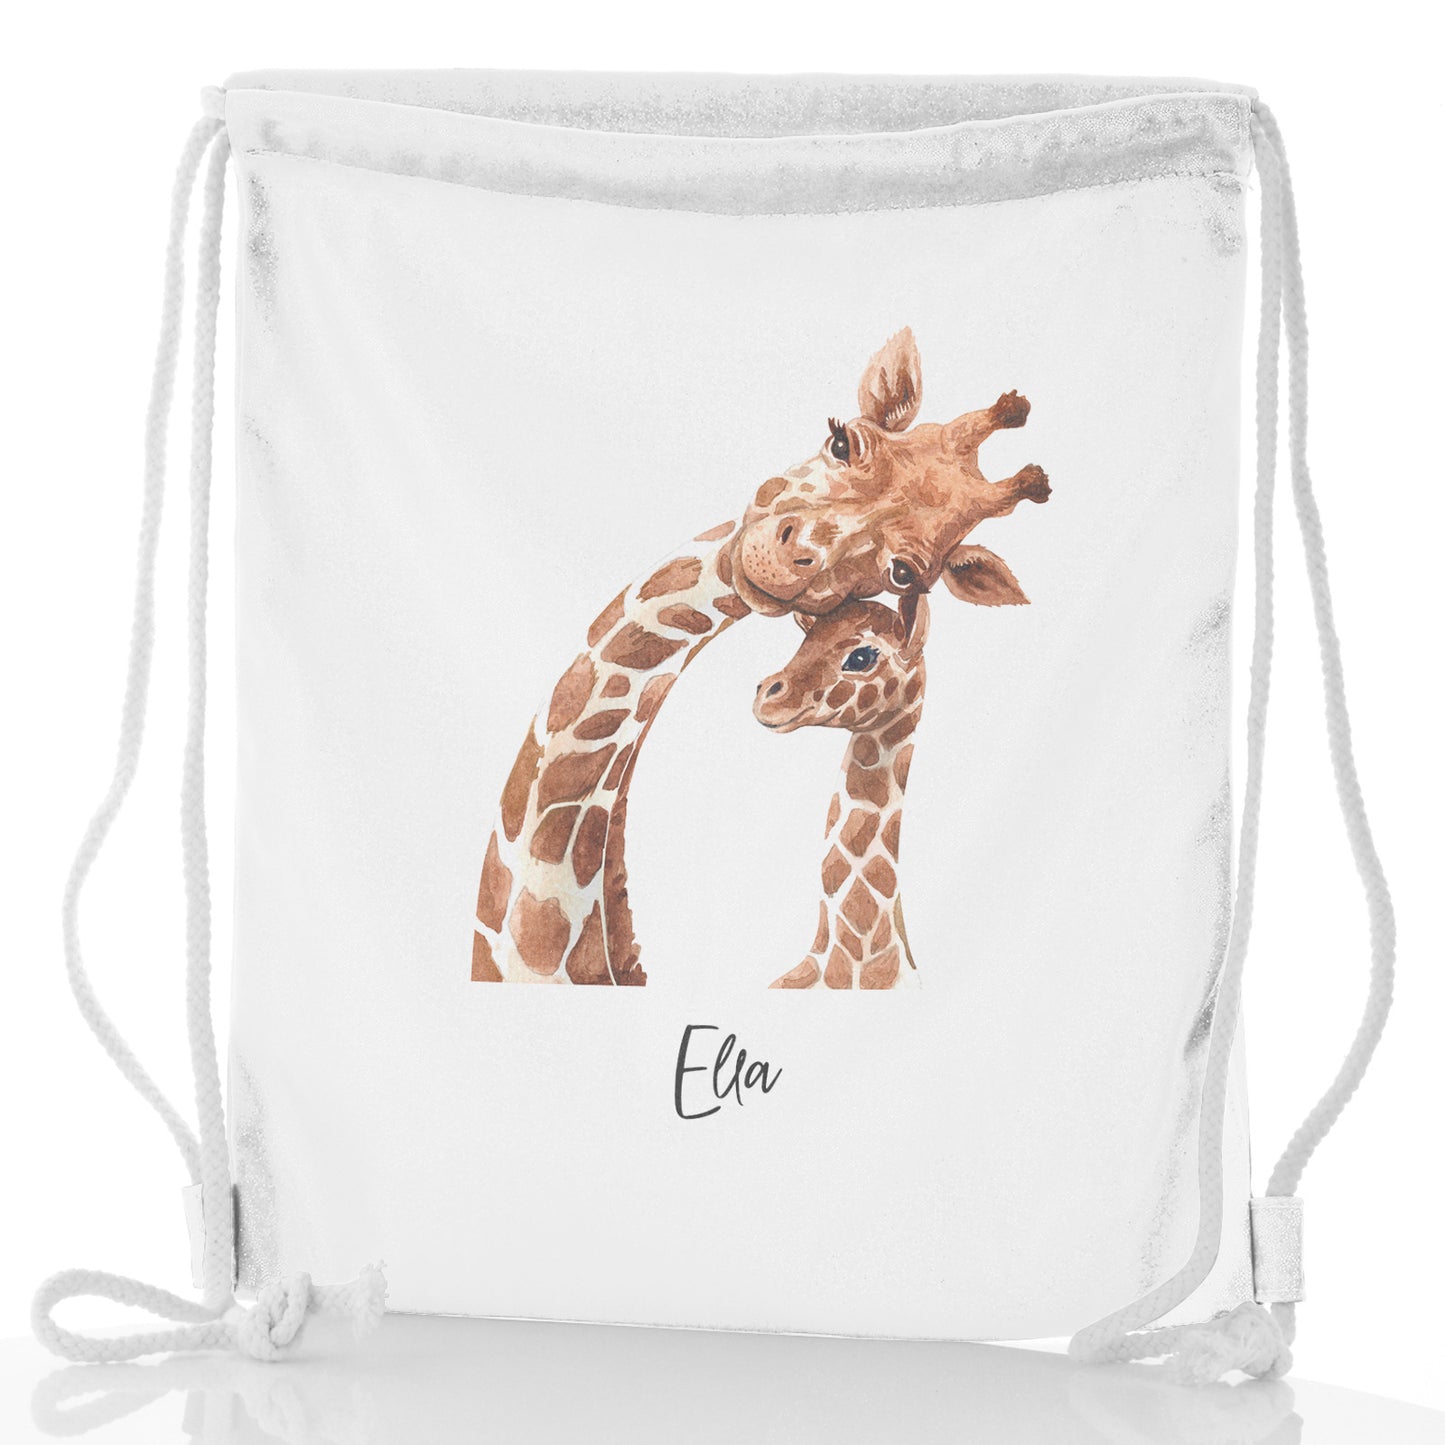 Personalised Glitter Drawstring Backpack with Welcoming Text and Relaxing Mum and Baby Giraffes